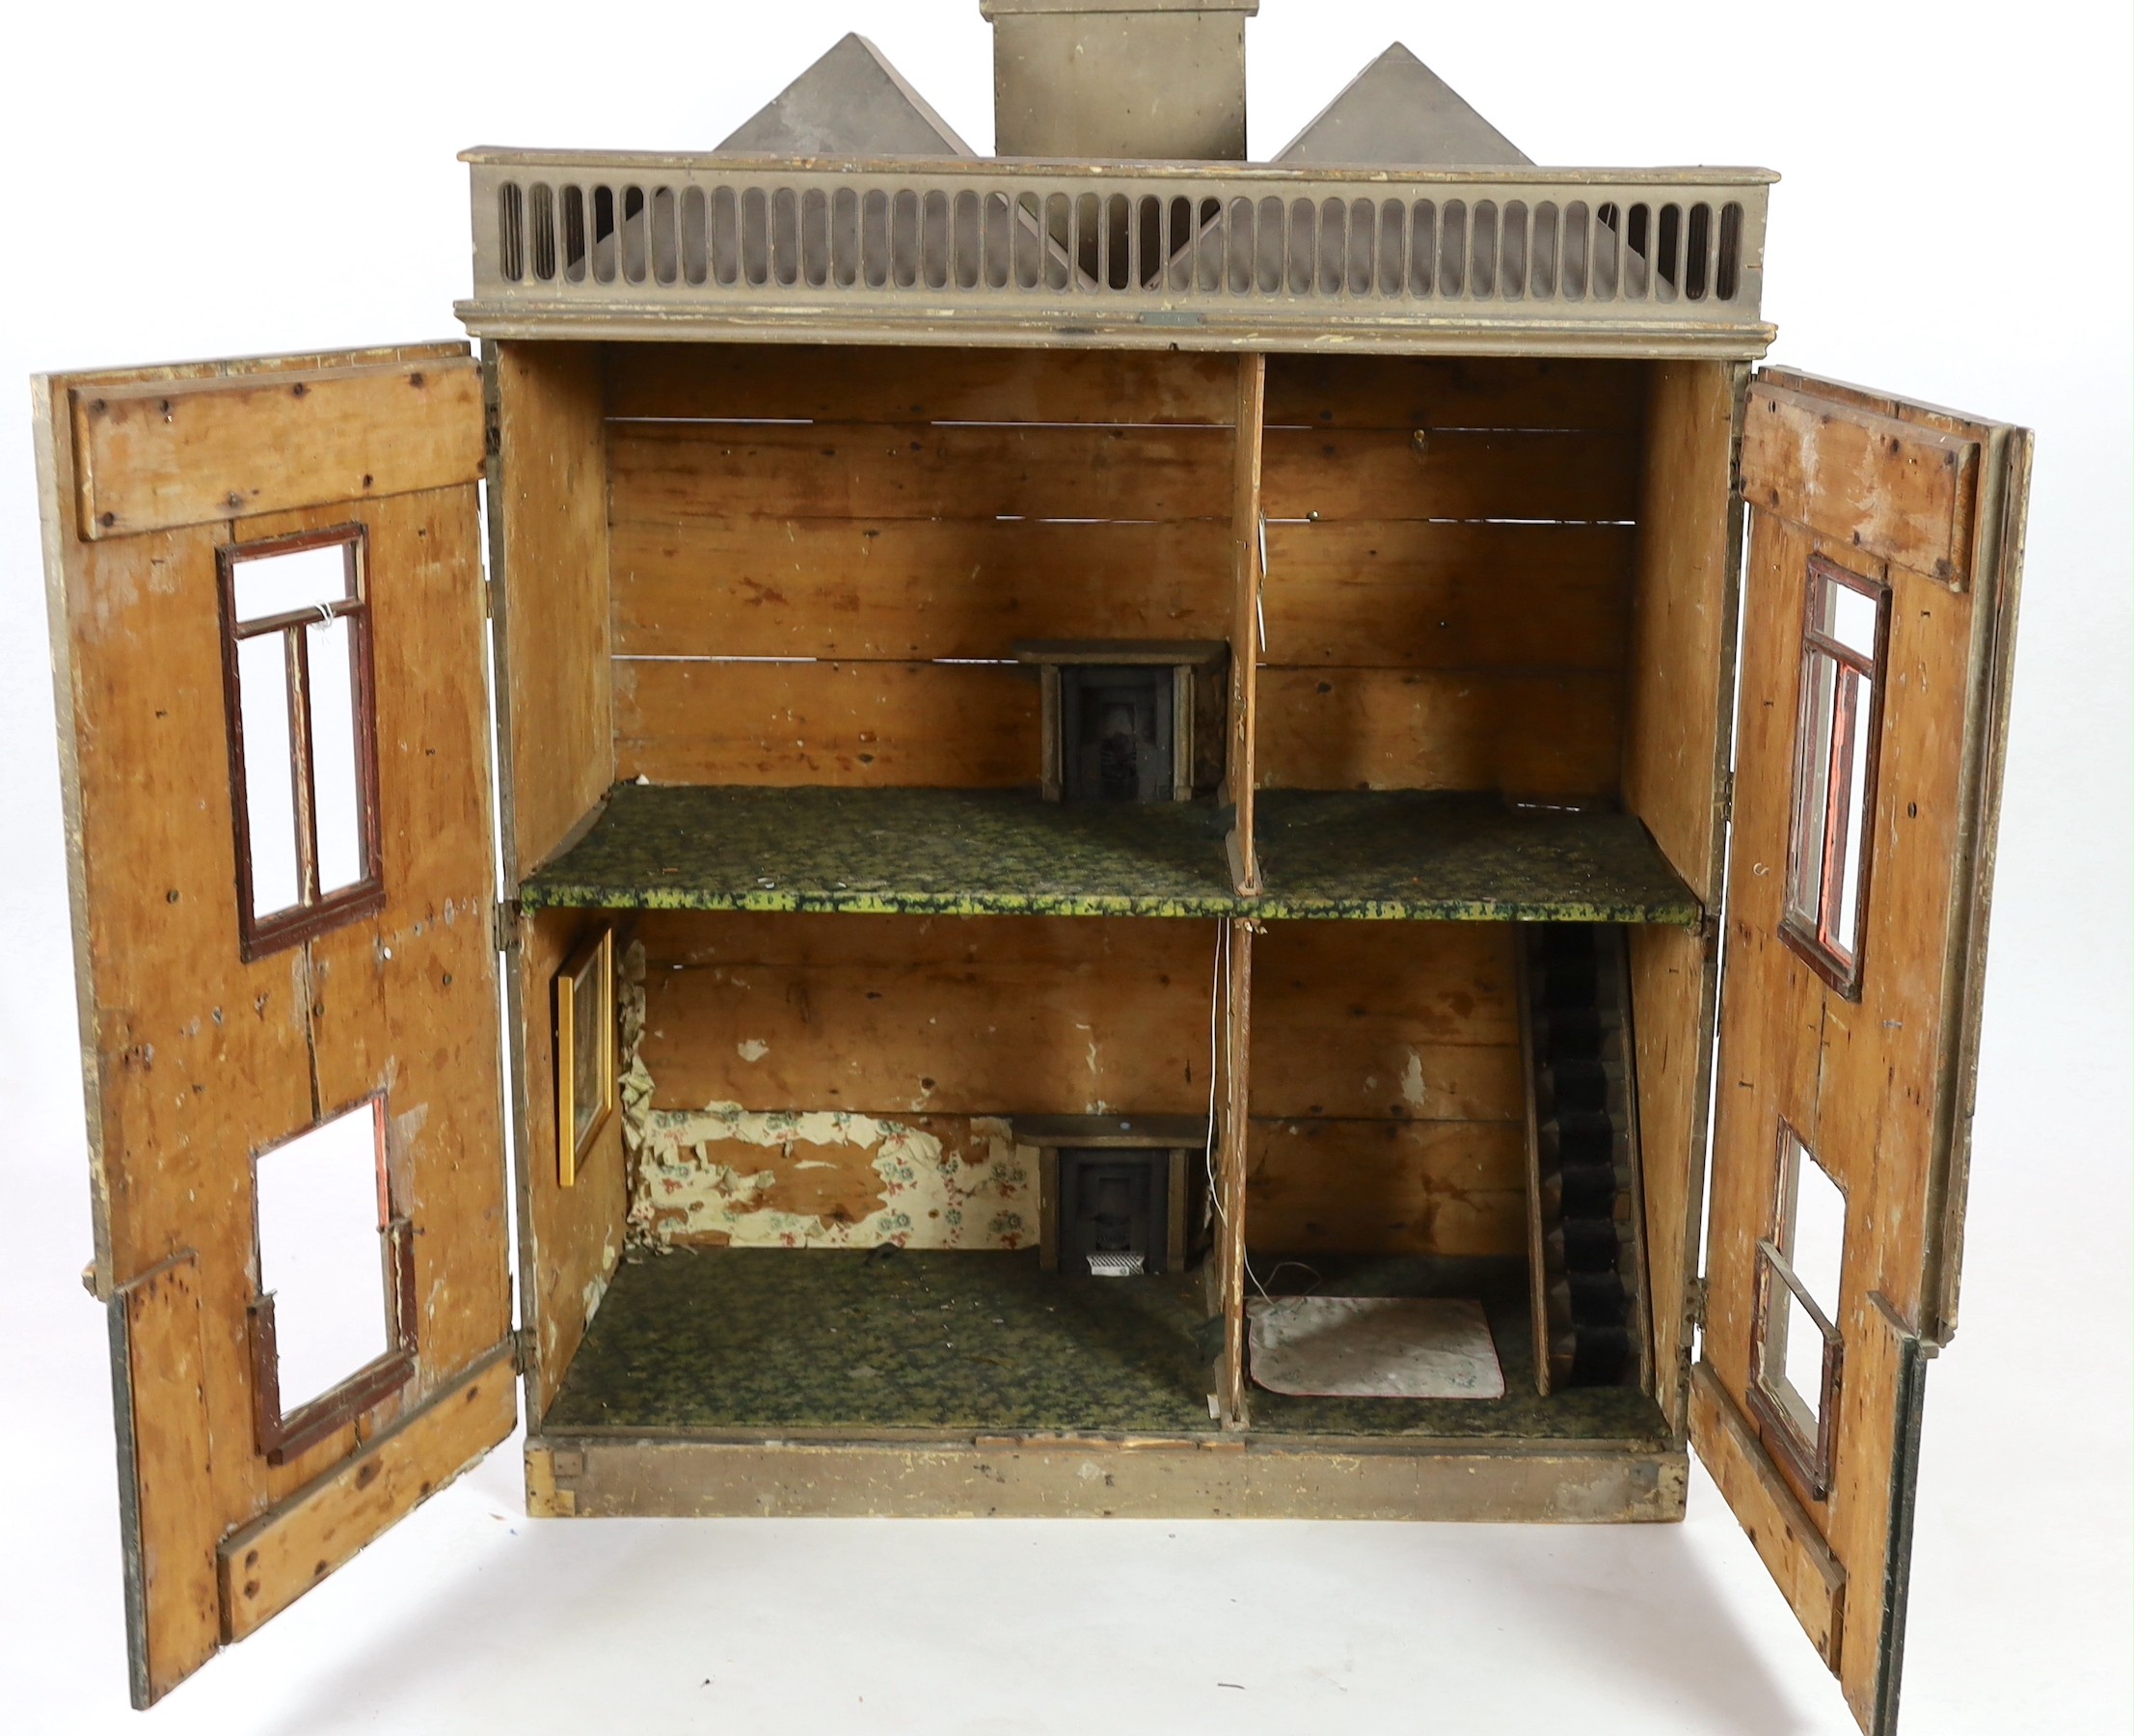 A very large English dolls’ house, circa 1840-1850, with a central panelled door and large windows - Image 8 of 10